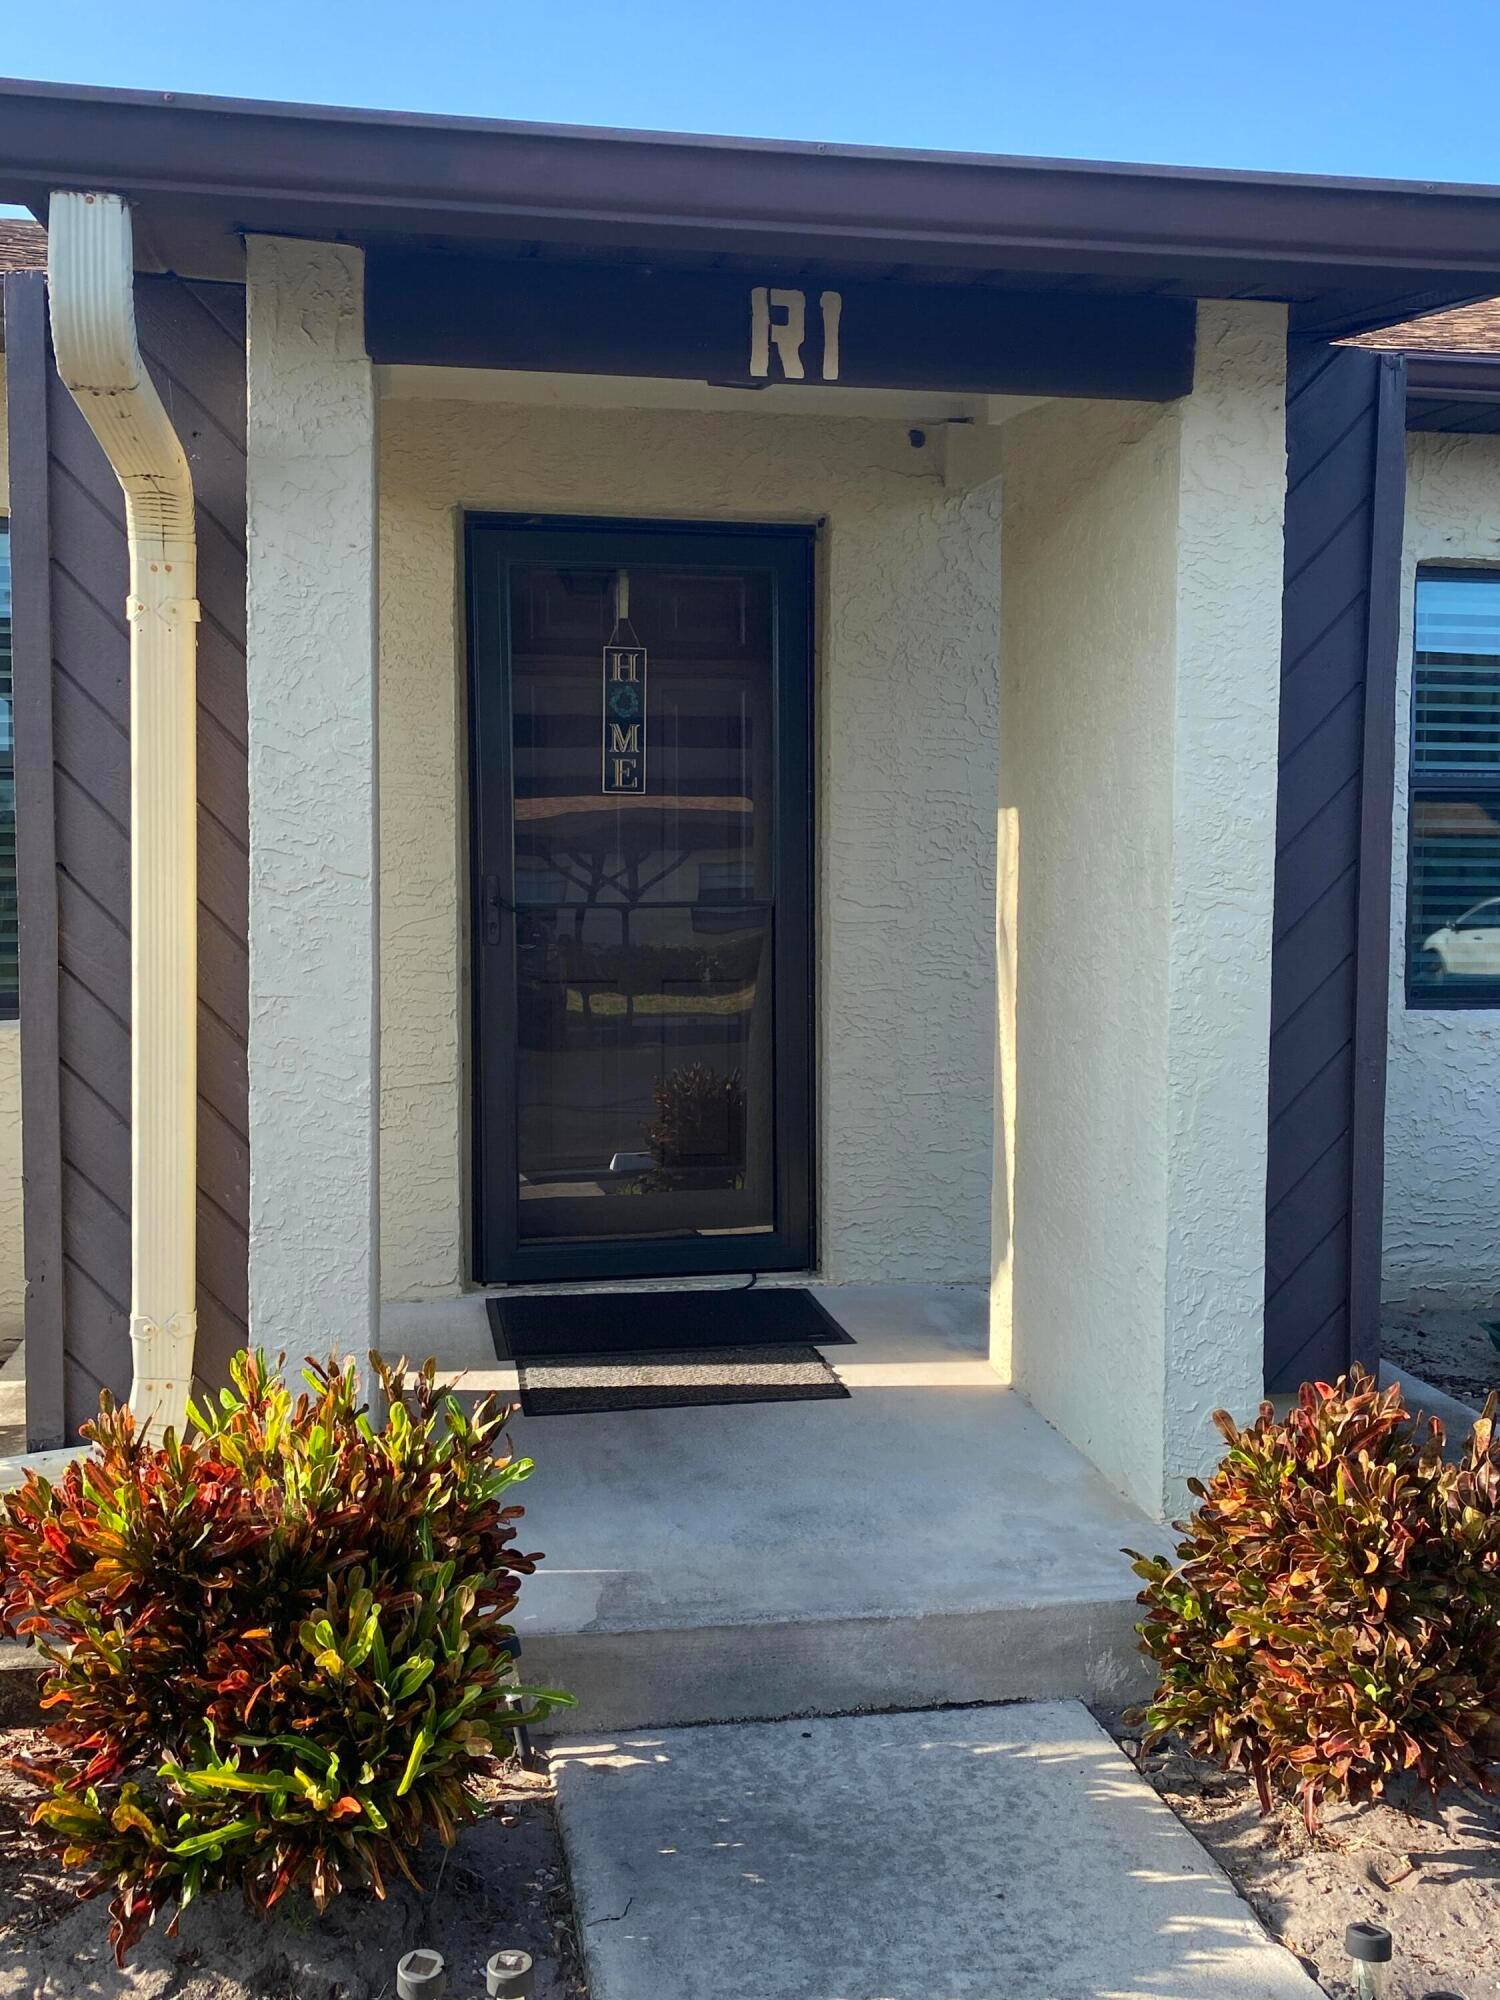 2Bedroom 2Full Bathroom updated vanity, new water heater, new flooring, new AC, new roof and shutters in gated community.